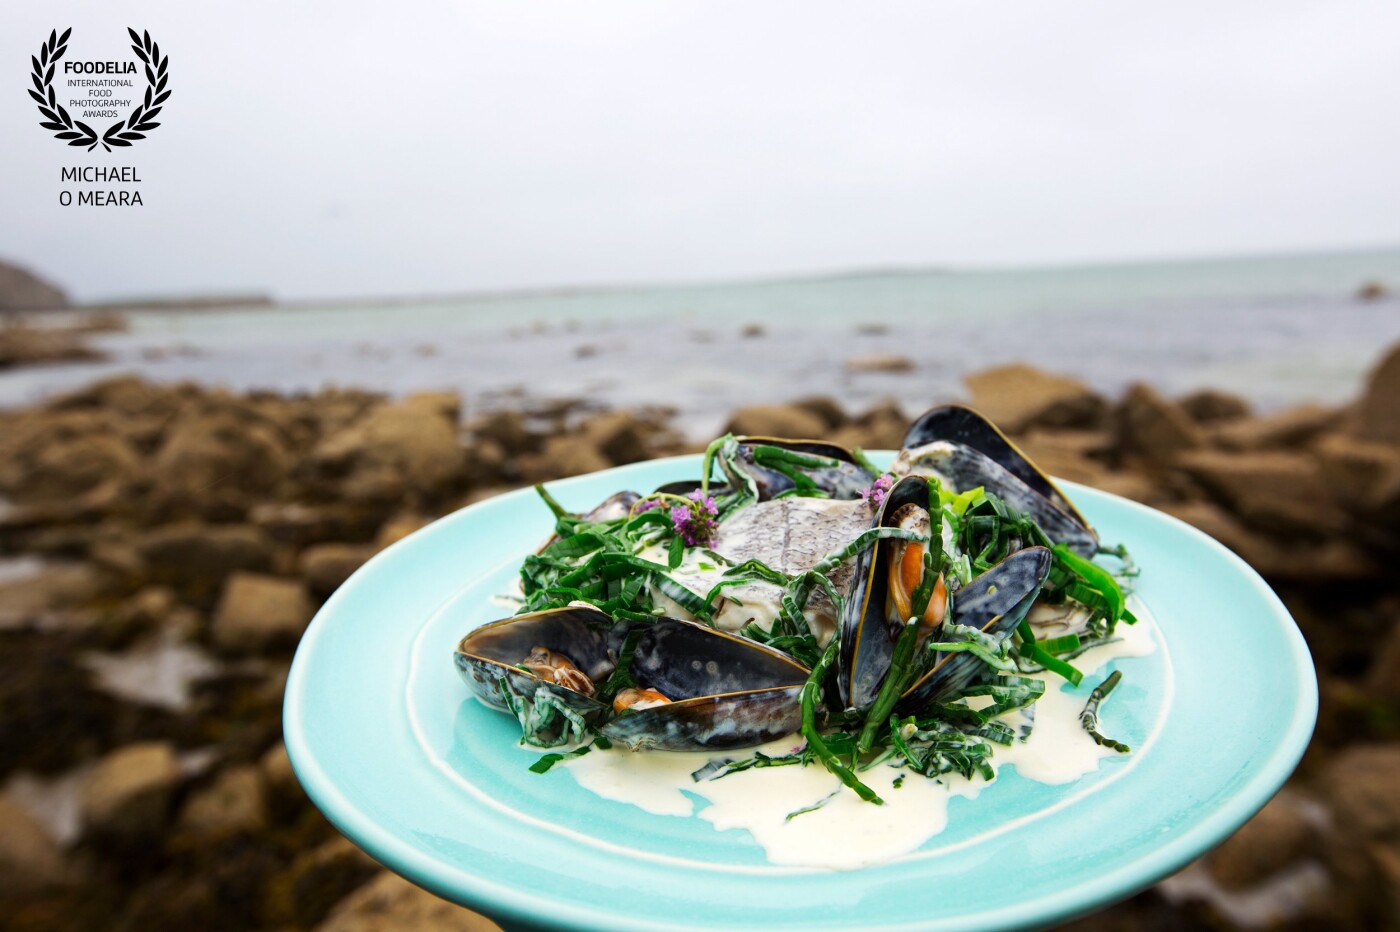 With this image I wanted to give the seafood a sense of place by the sea. The Hake and mussels from the coast of Galway are wonderful when finished with a simple sauce of wild leek and cream.